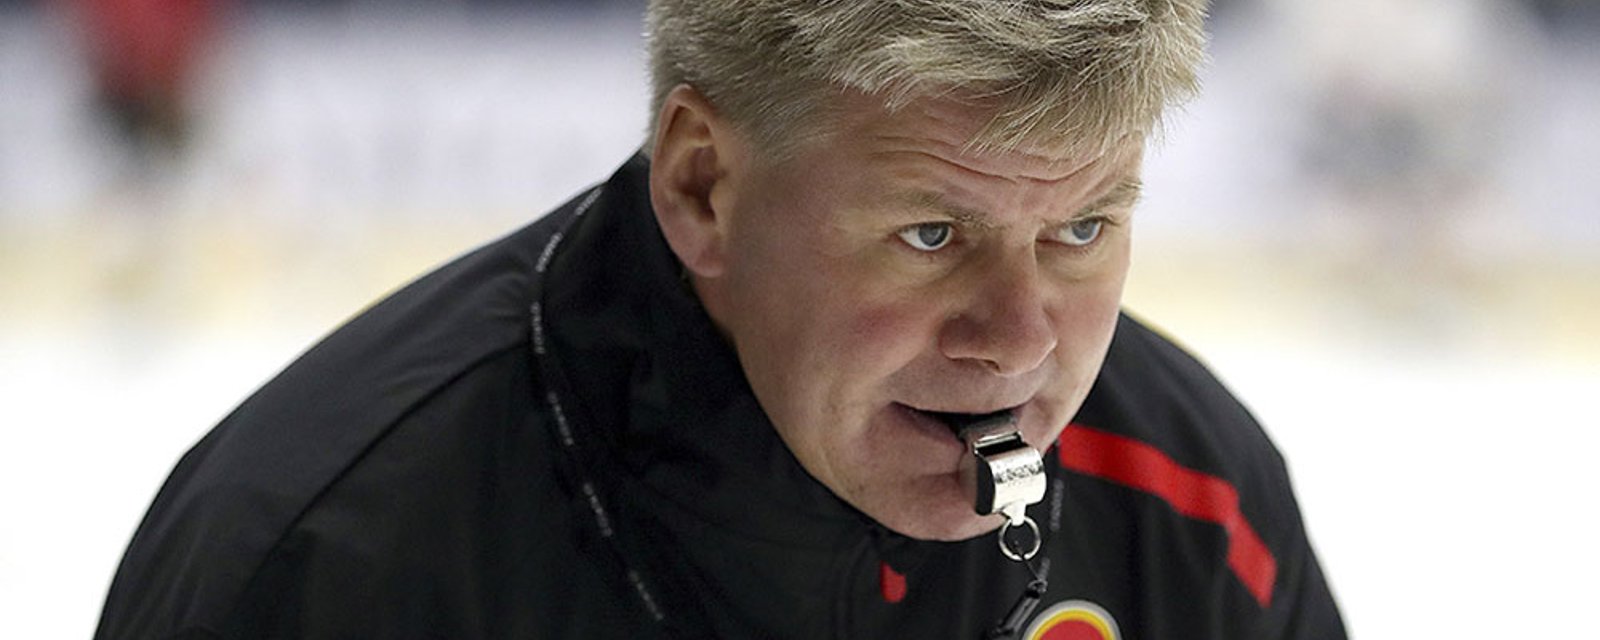 Flames coach Peters accused of using the “N-word” against former player